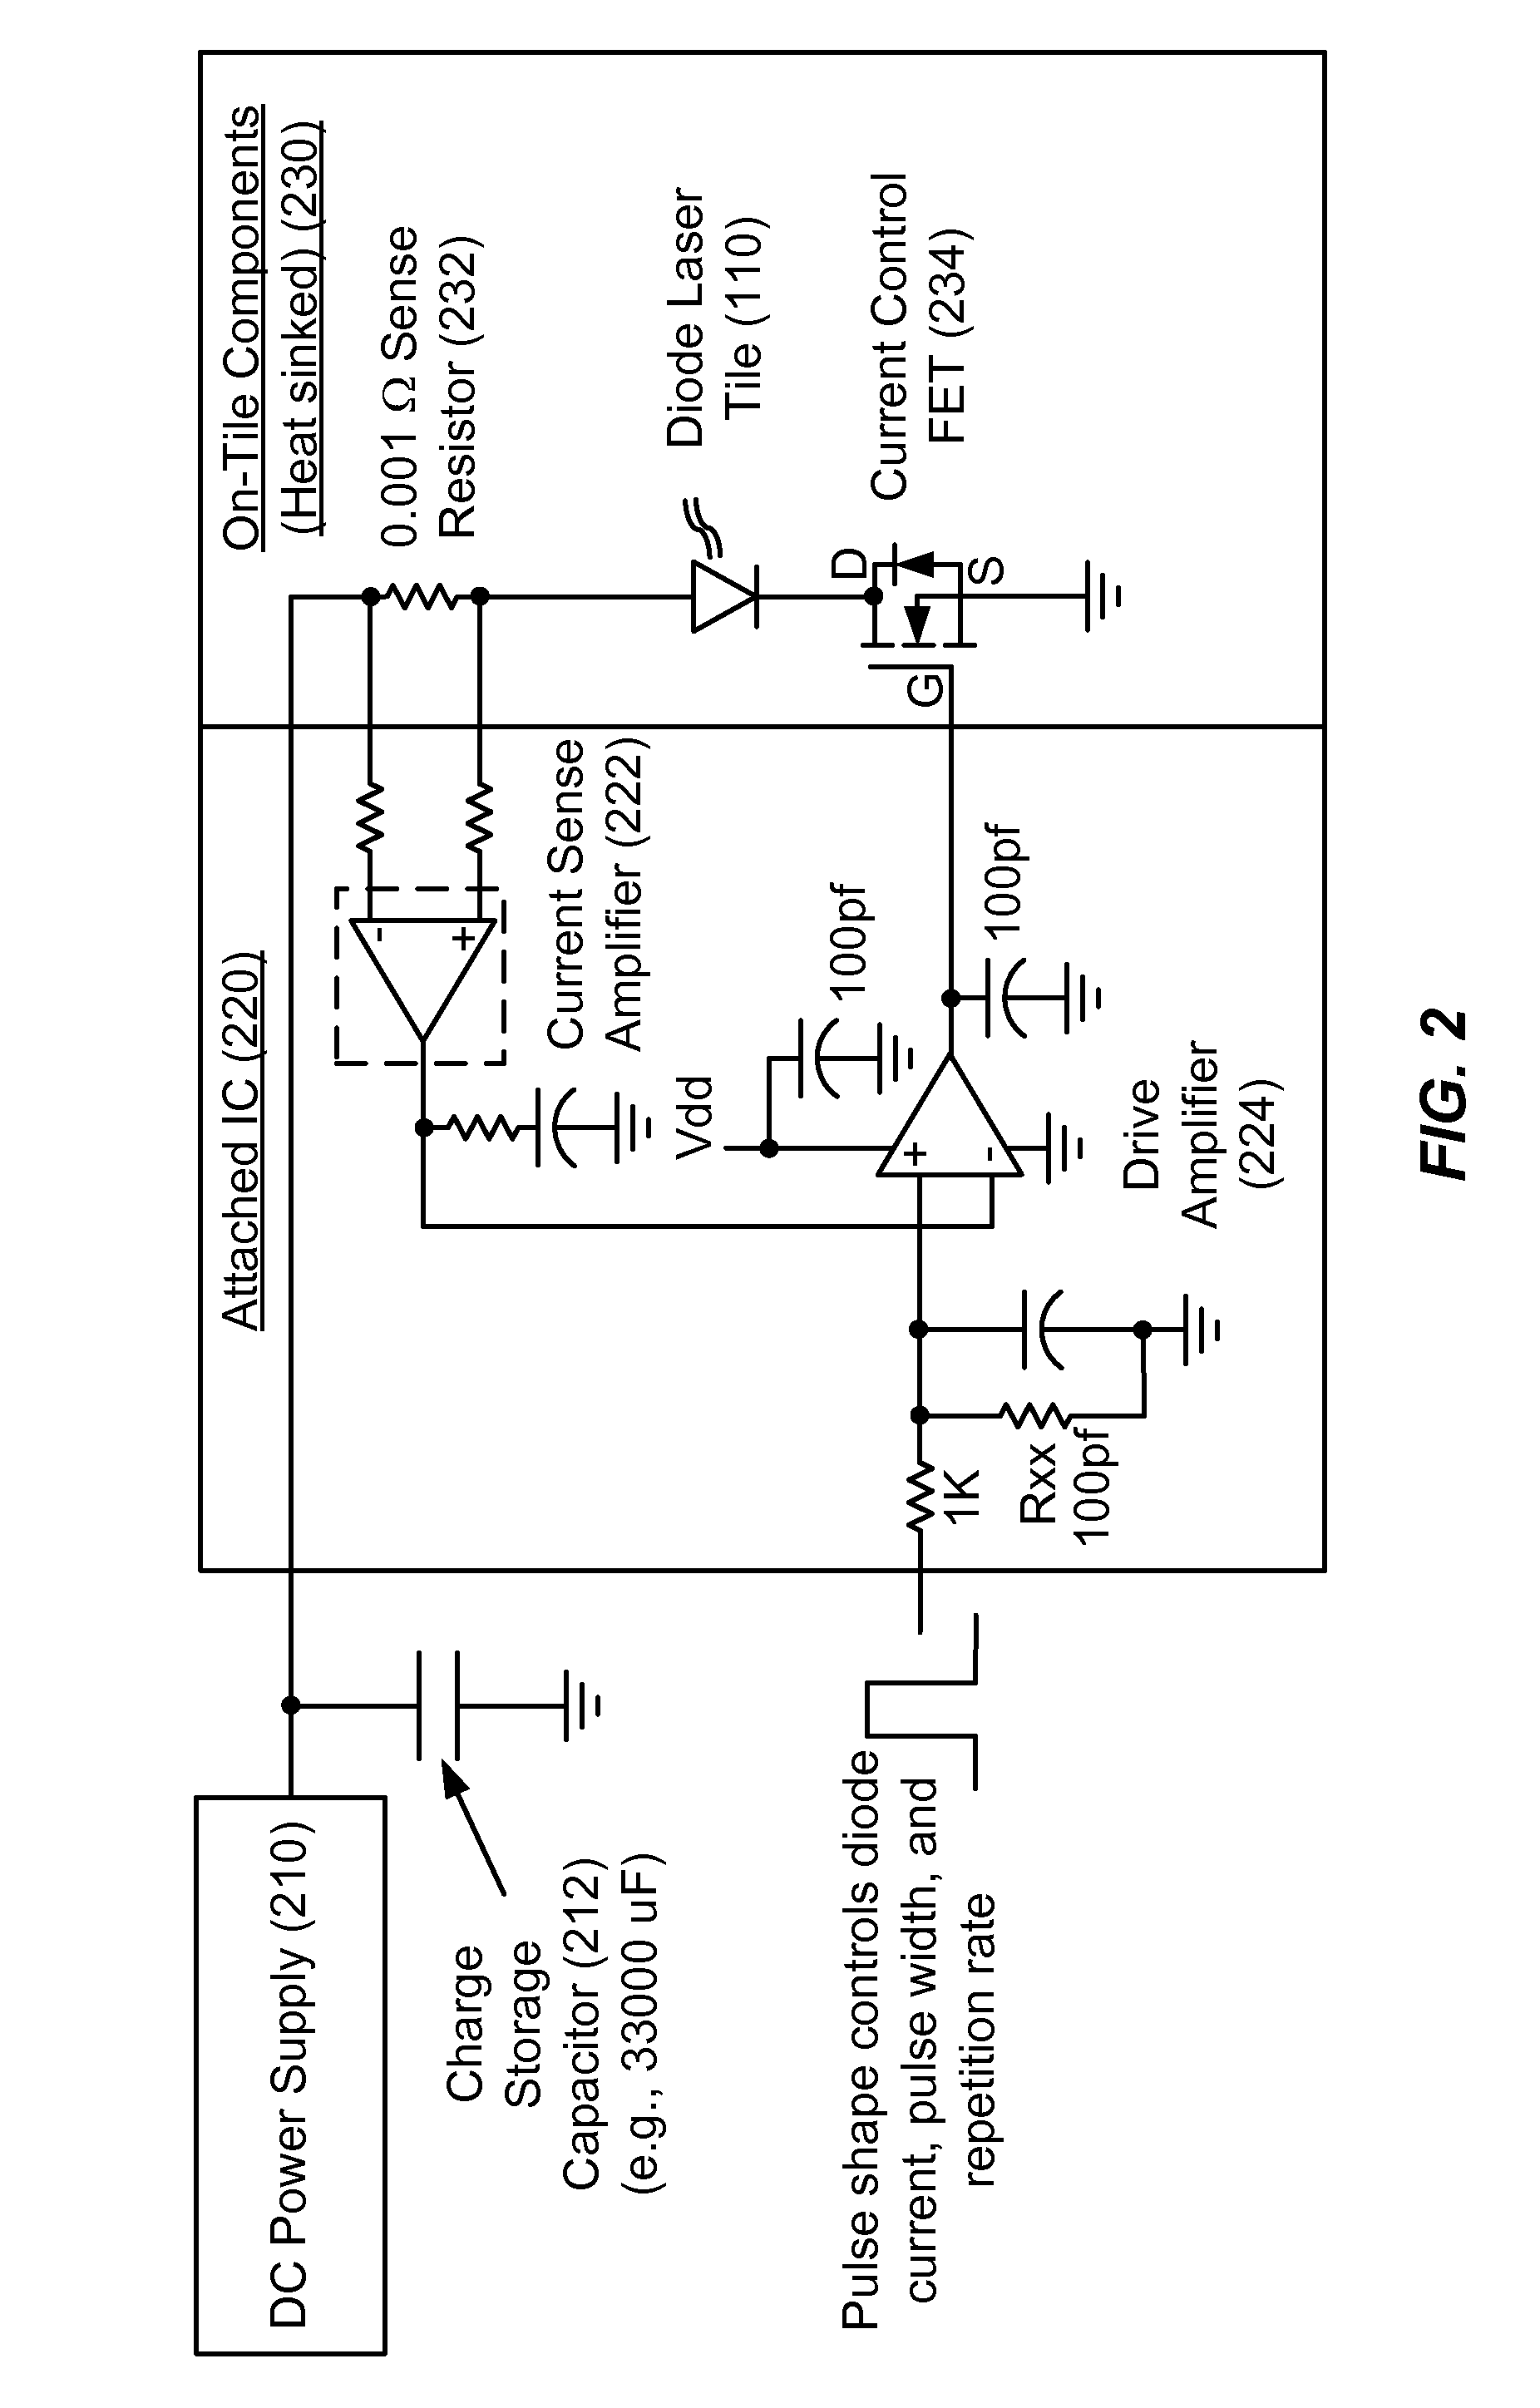 Method and system for powering and cooling semiconductor layers